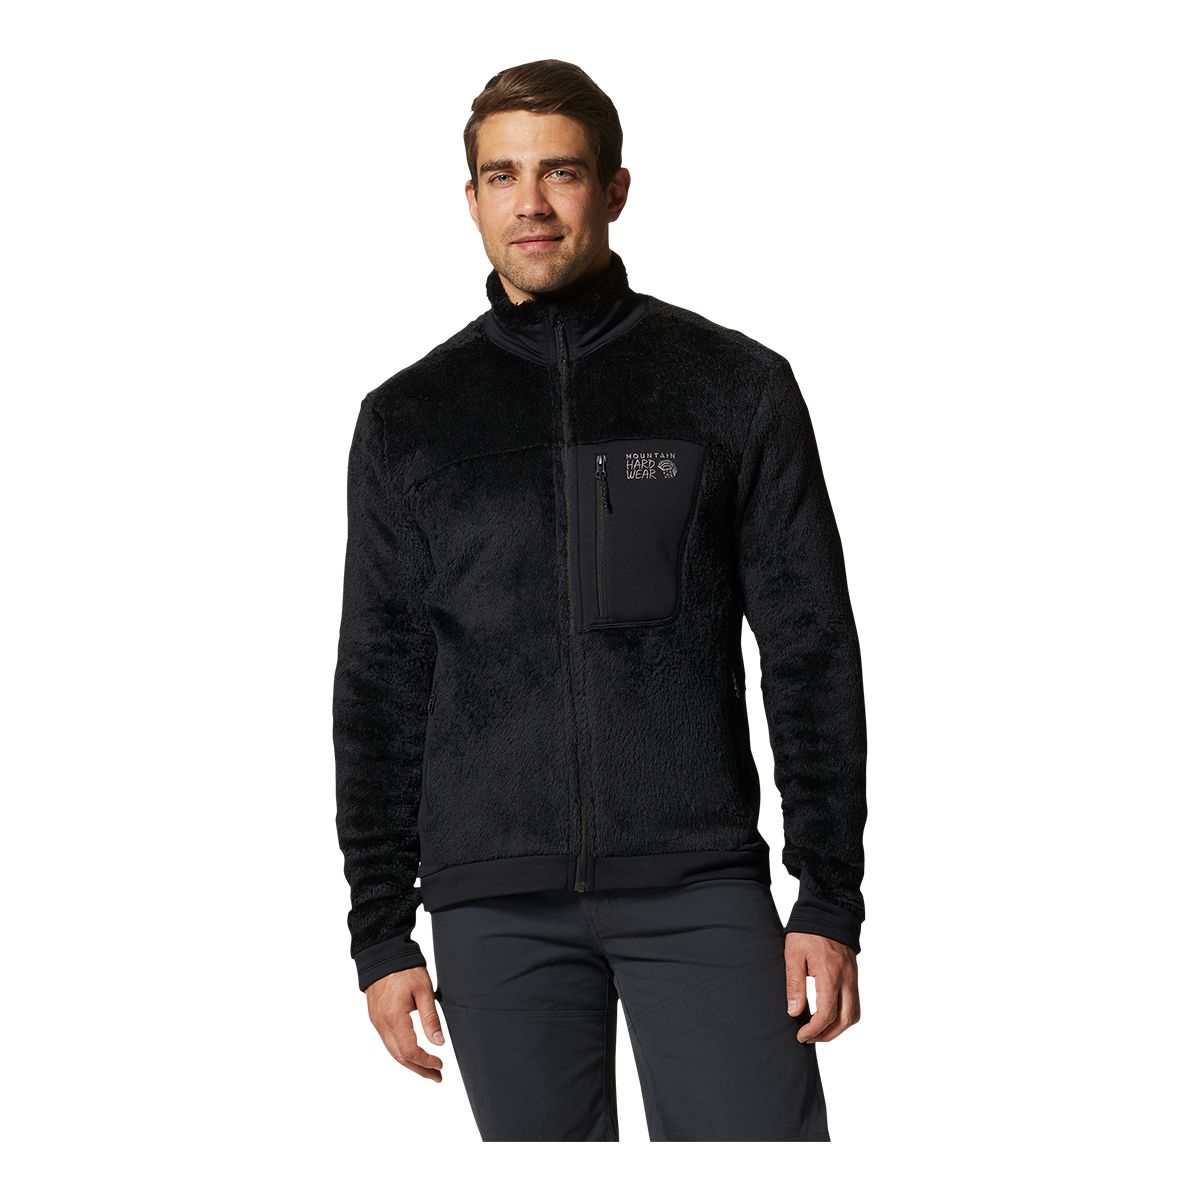 https://media-www.atmosphere.ca/product/div-03-softgoods/dpt-72-casual-clothing/sdpt-01-mens/334215228/mhw-m-polartec-high-loft-jkt-923-black-f7709d04-1941-470f-a168-38a5beb063b7-jpgrendition.jpg?imdensity=1&imwidth=1244&impolicy=mZoom